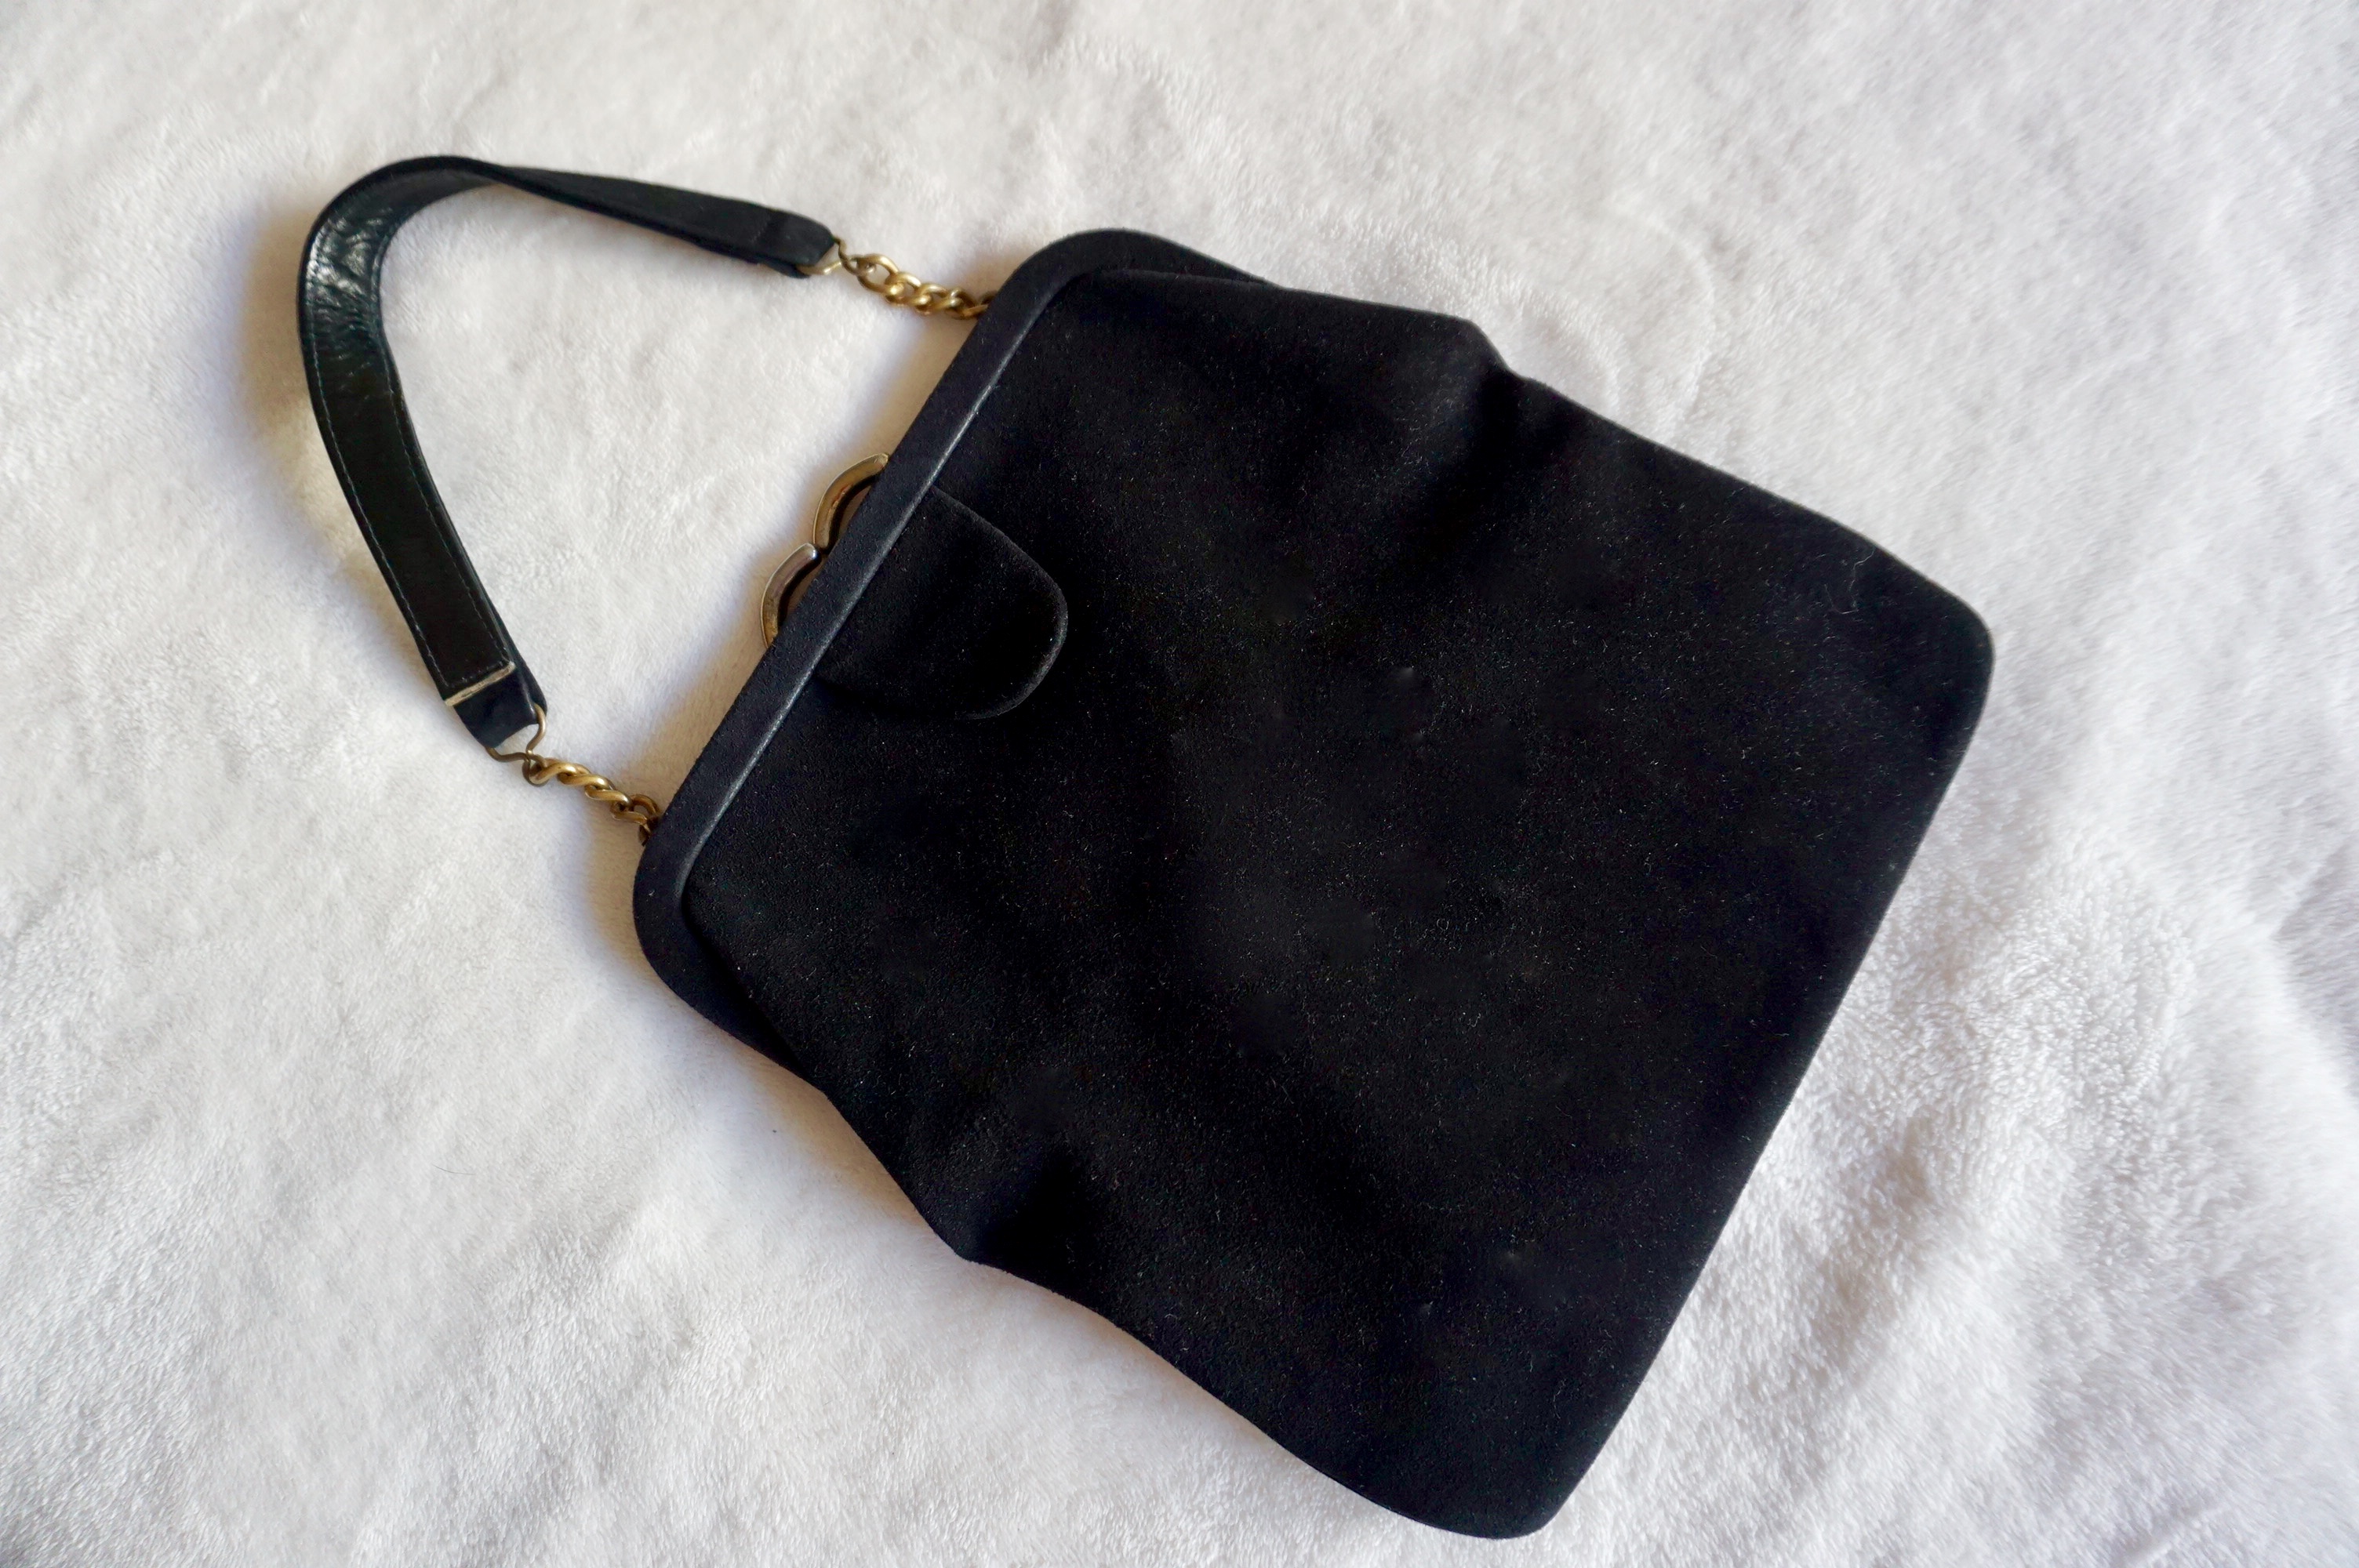 Black Leather Kiss Lock Bag, Clutch, Vintage Shoulder and Crossbody Bag for  Women, Evening Bag and for Daily Use, Handmade Kiss Lock